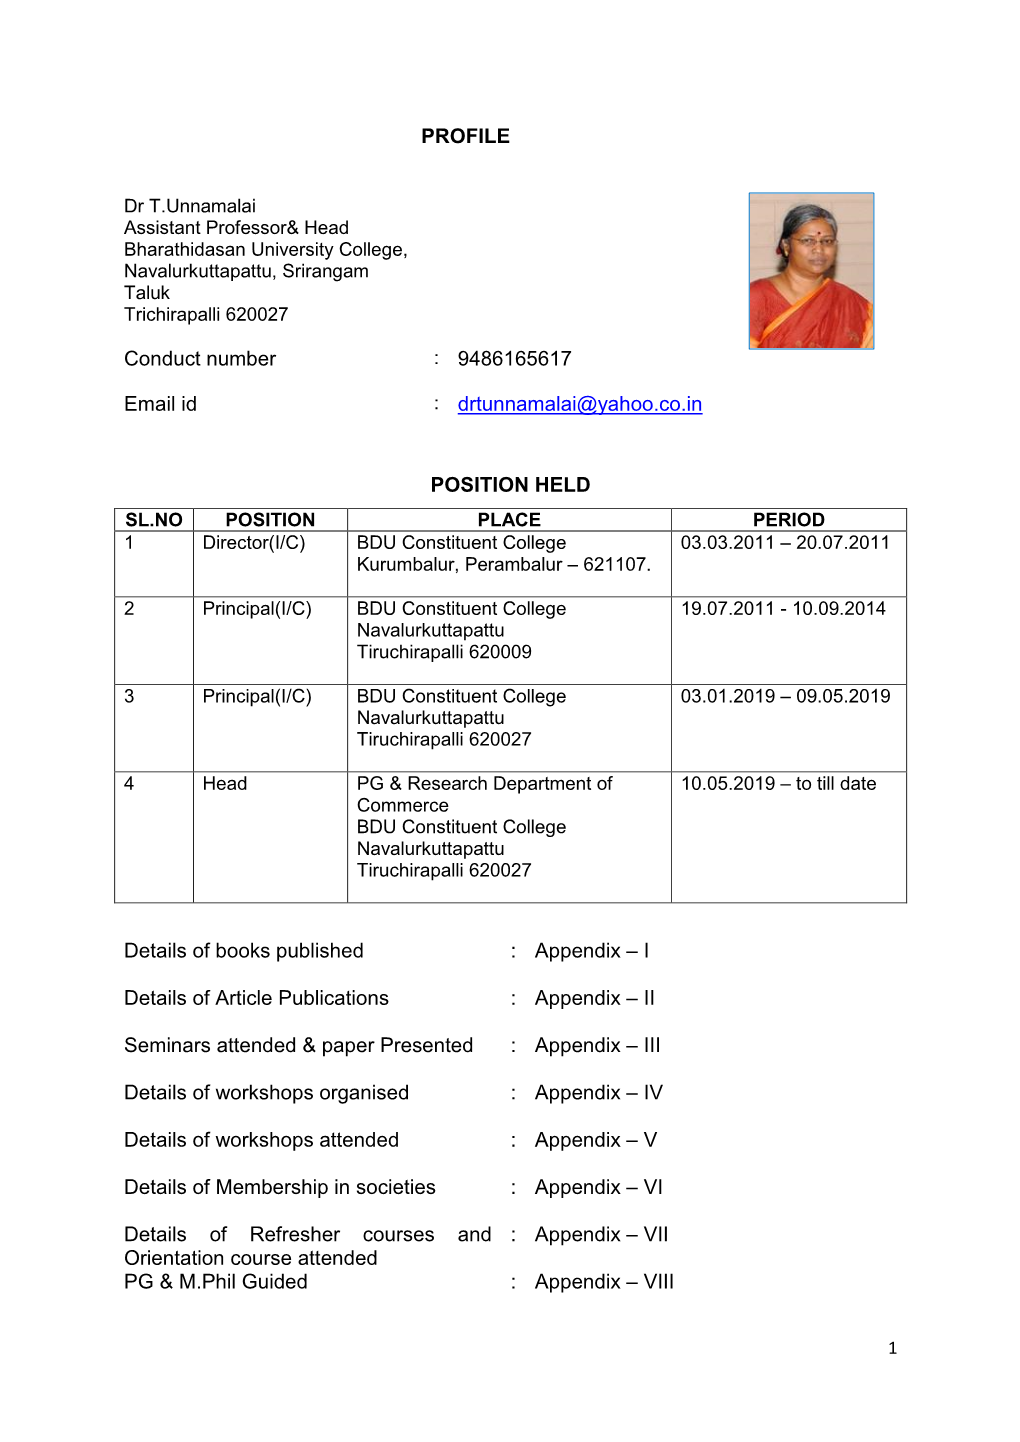 PROFILE Conduct Number : 9486165617 Email Id : Drtunnamalai@Yahoo.Co.In POSITION HELD Details of Books Published : Appendix –